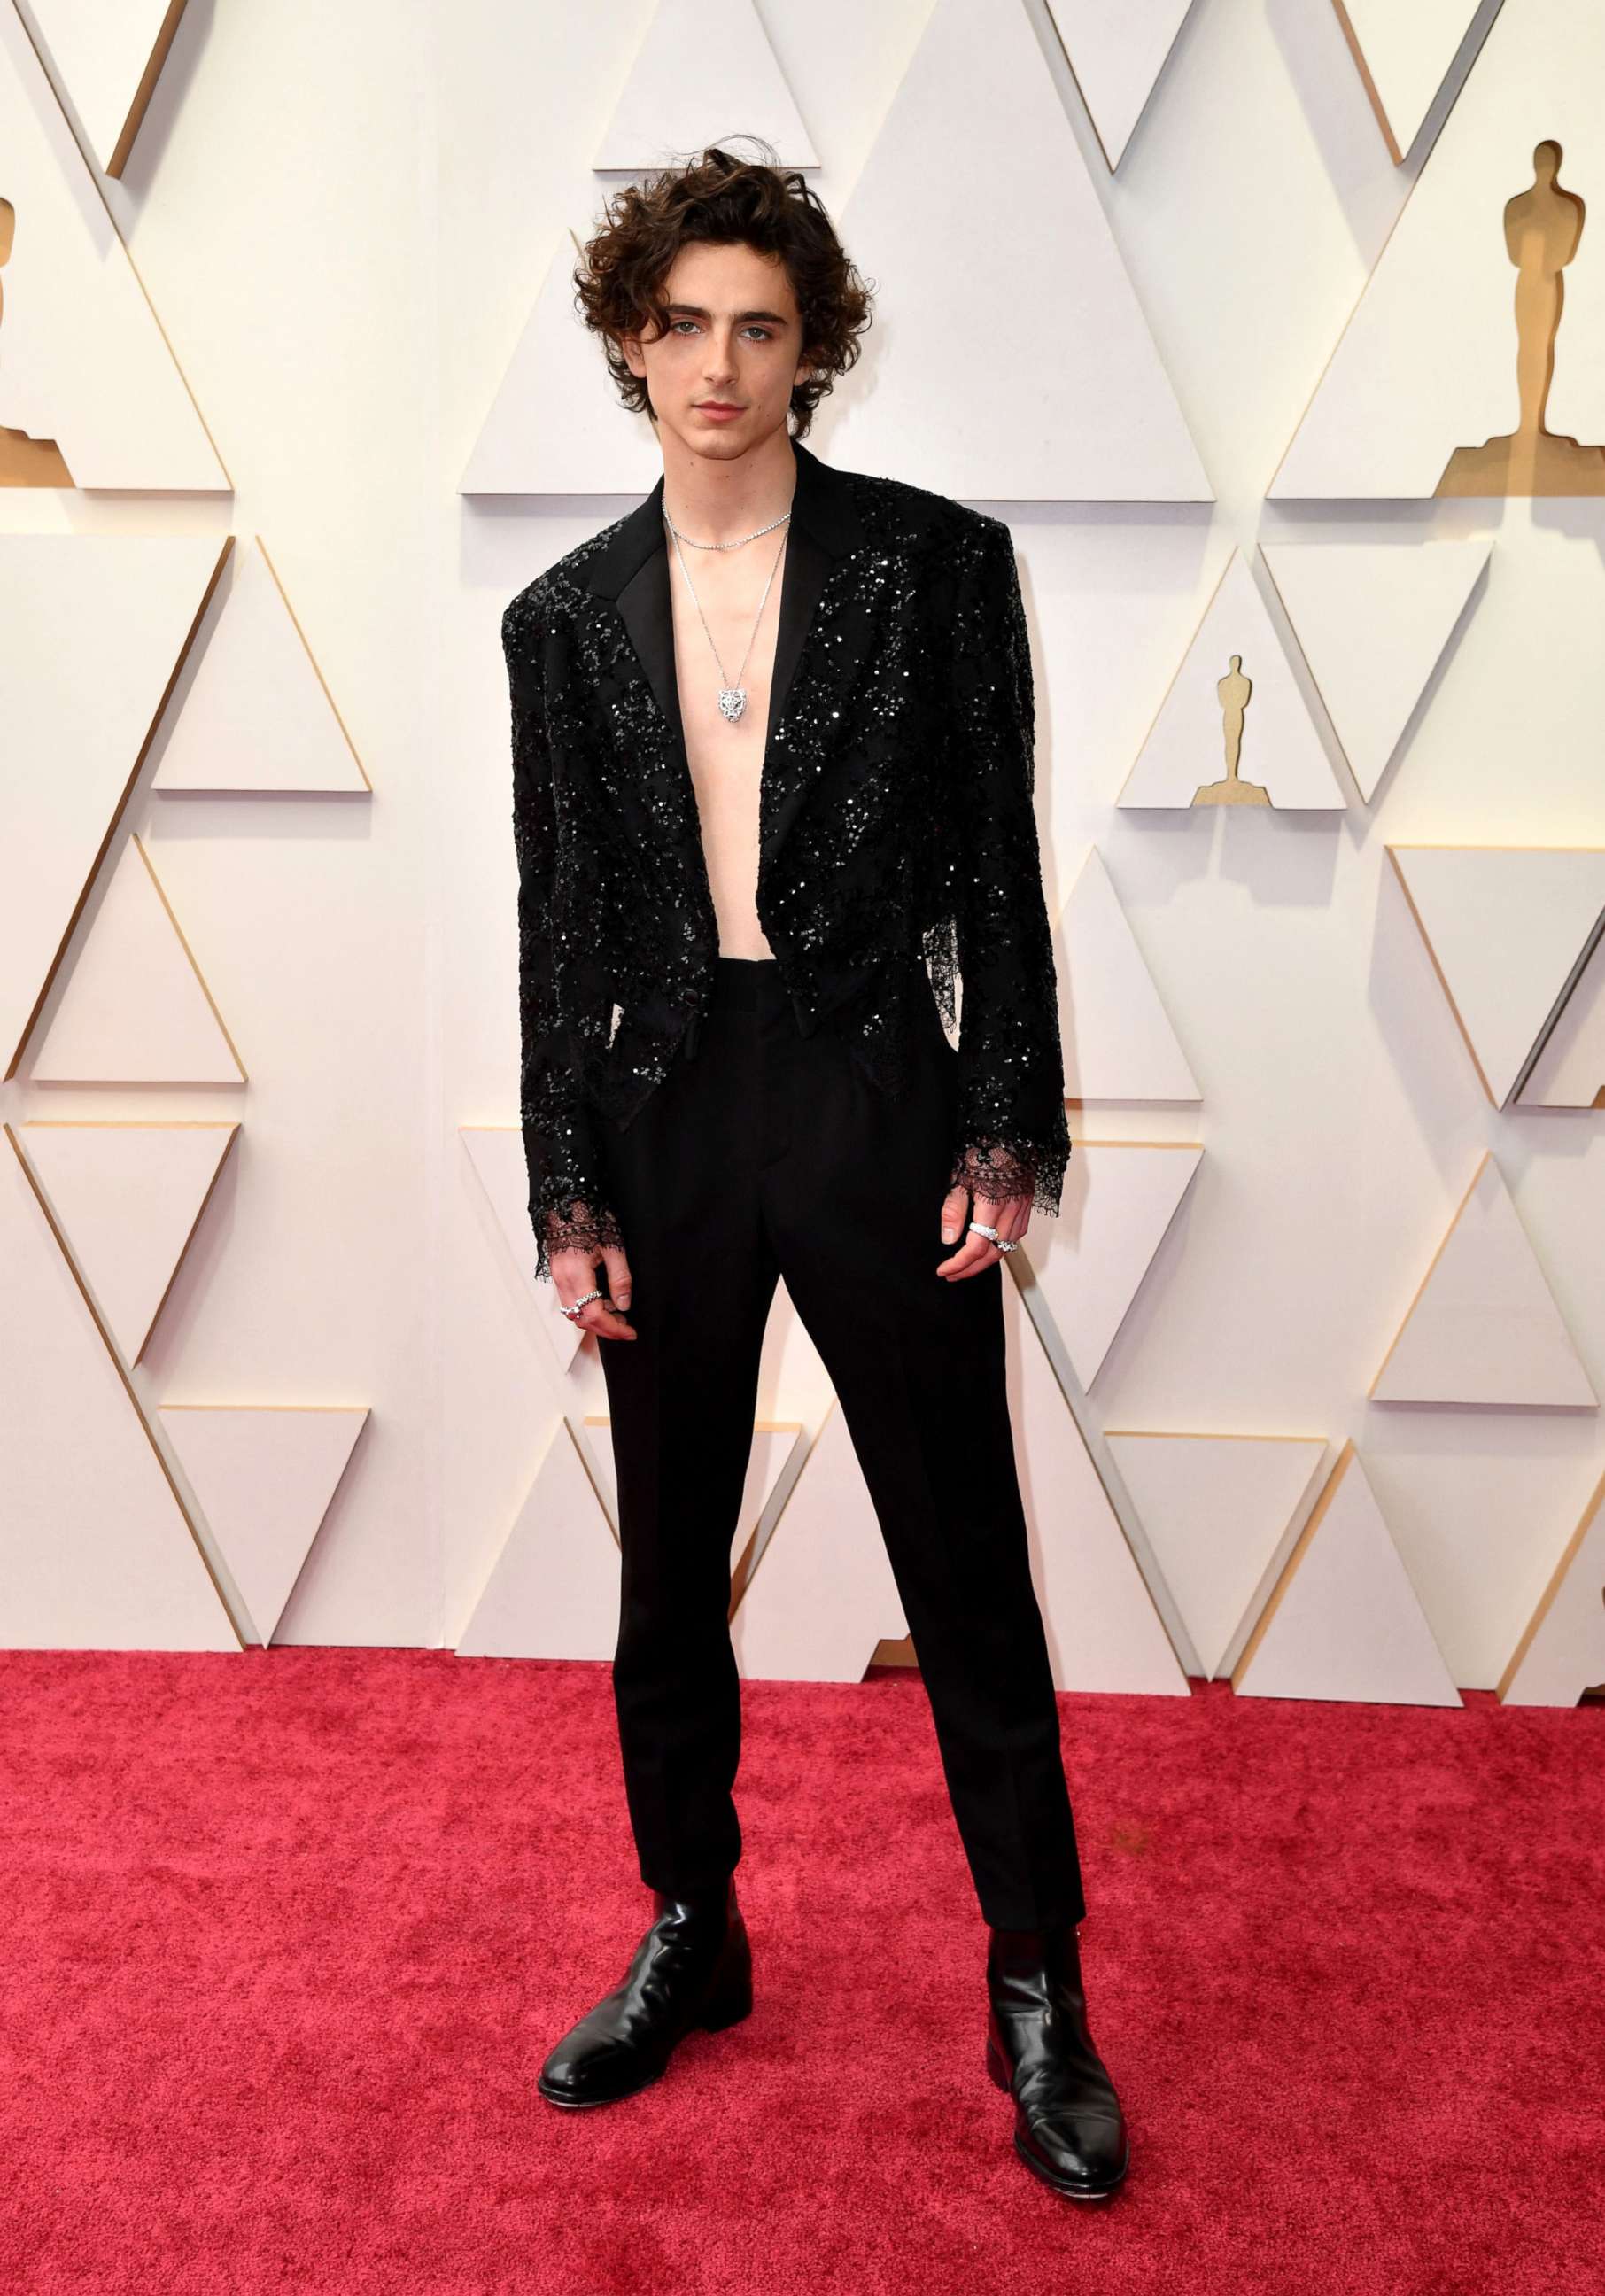 PHOTO: Timothee Chalamet attends the 94th Oscars at the Dolby Theatre in Hollywood, California on March 27, 2022.